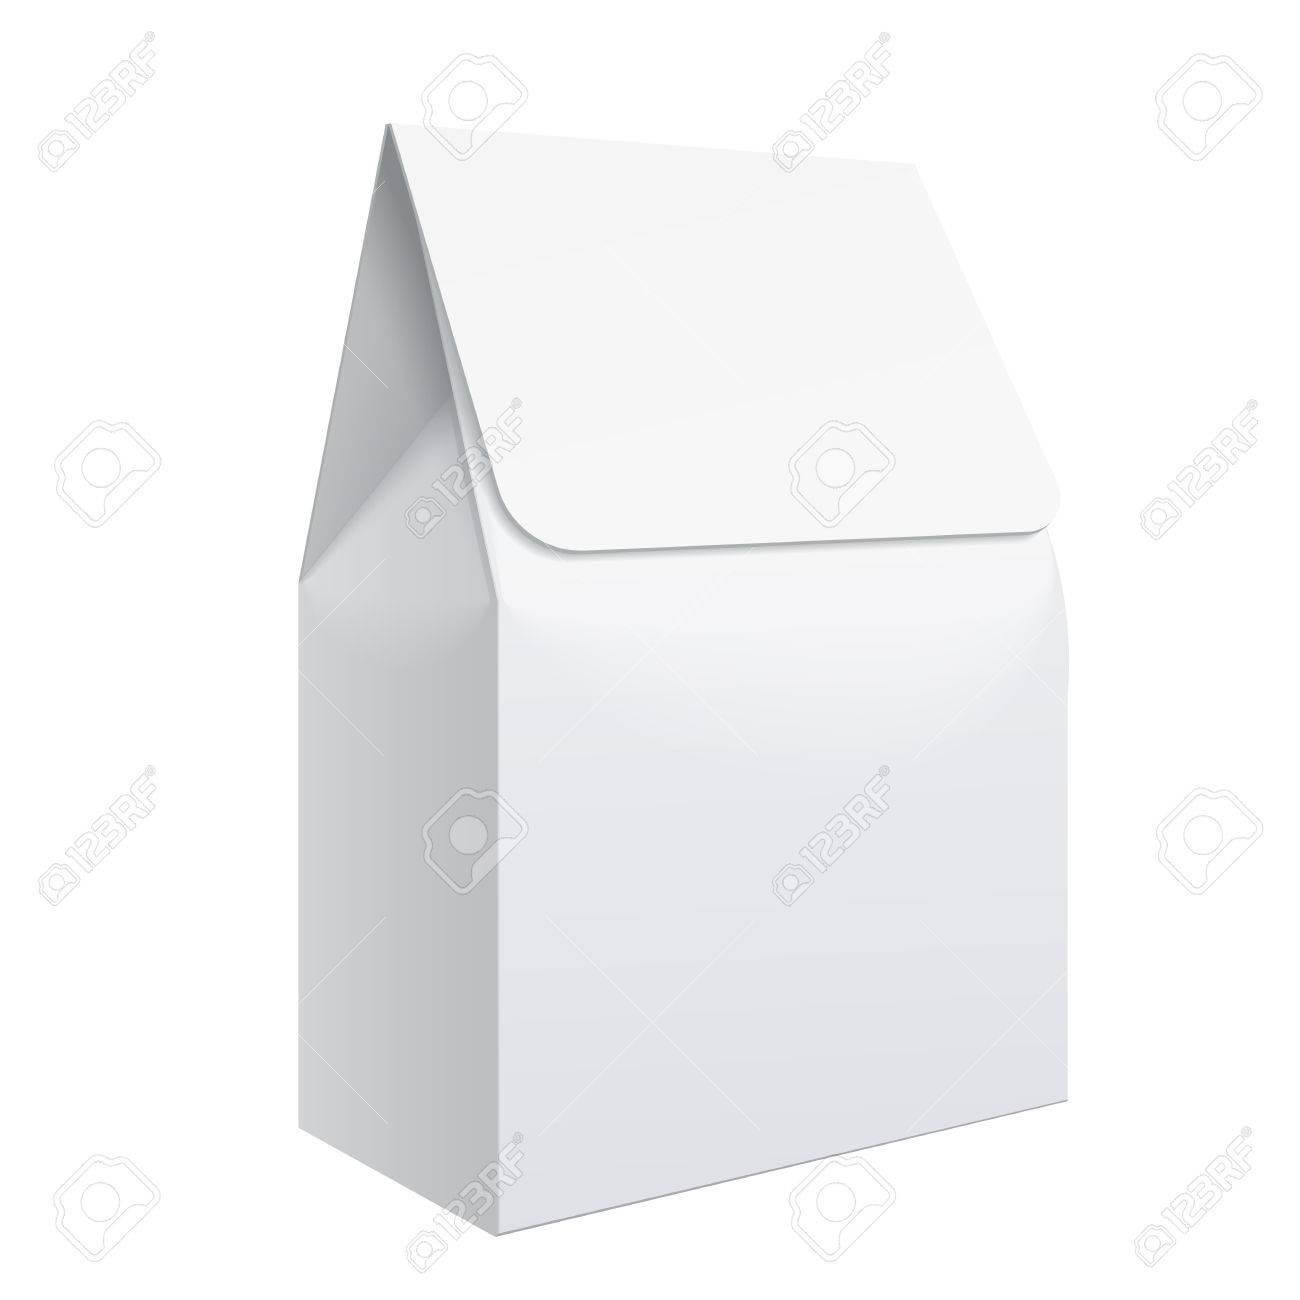 Realistic White Blank Template Packaging For Food. Food Packing.. For Blank Packaging Templates